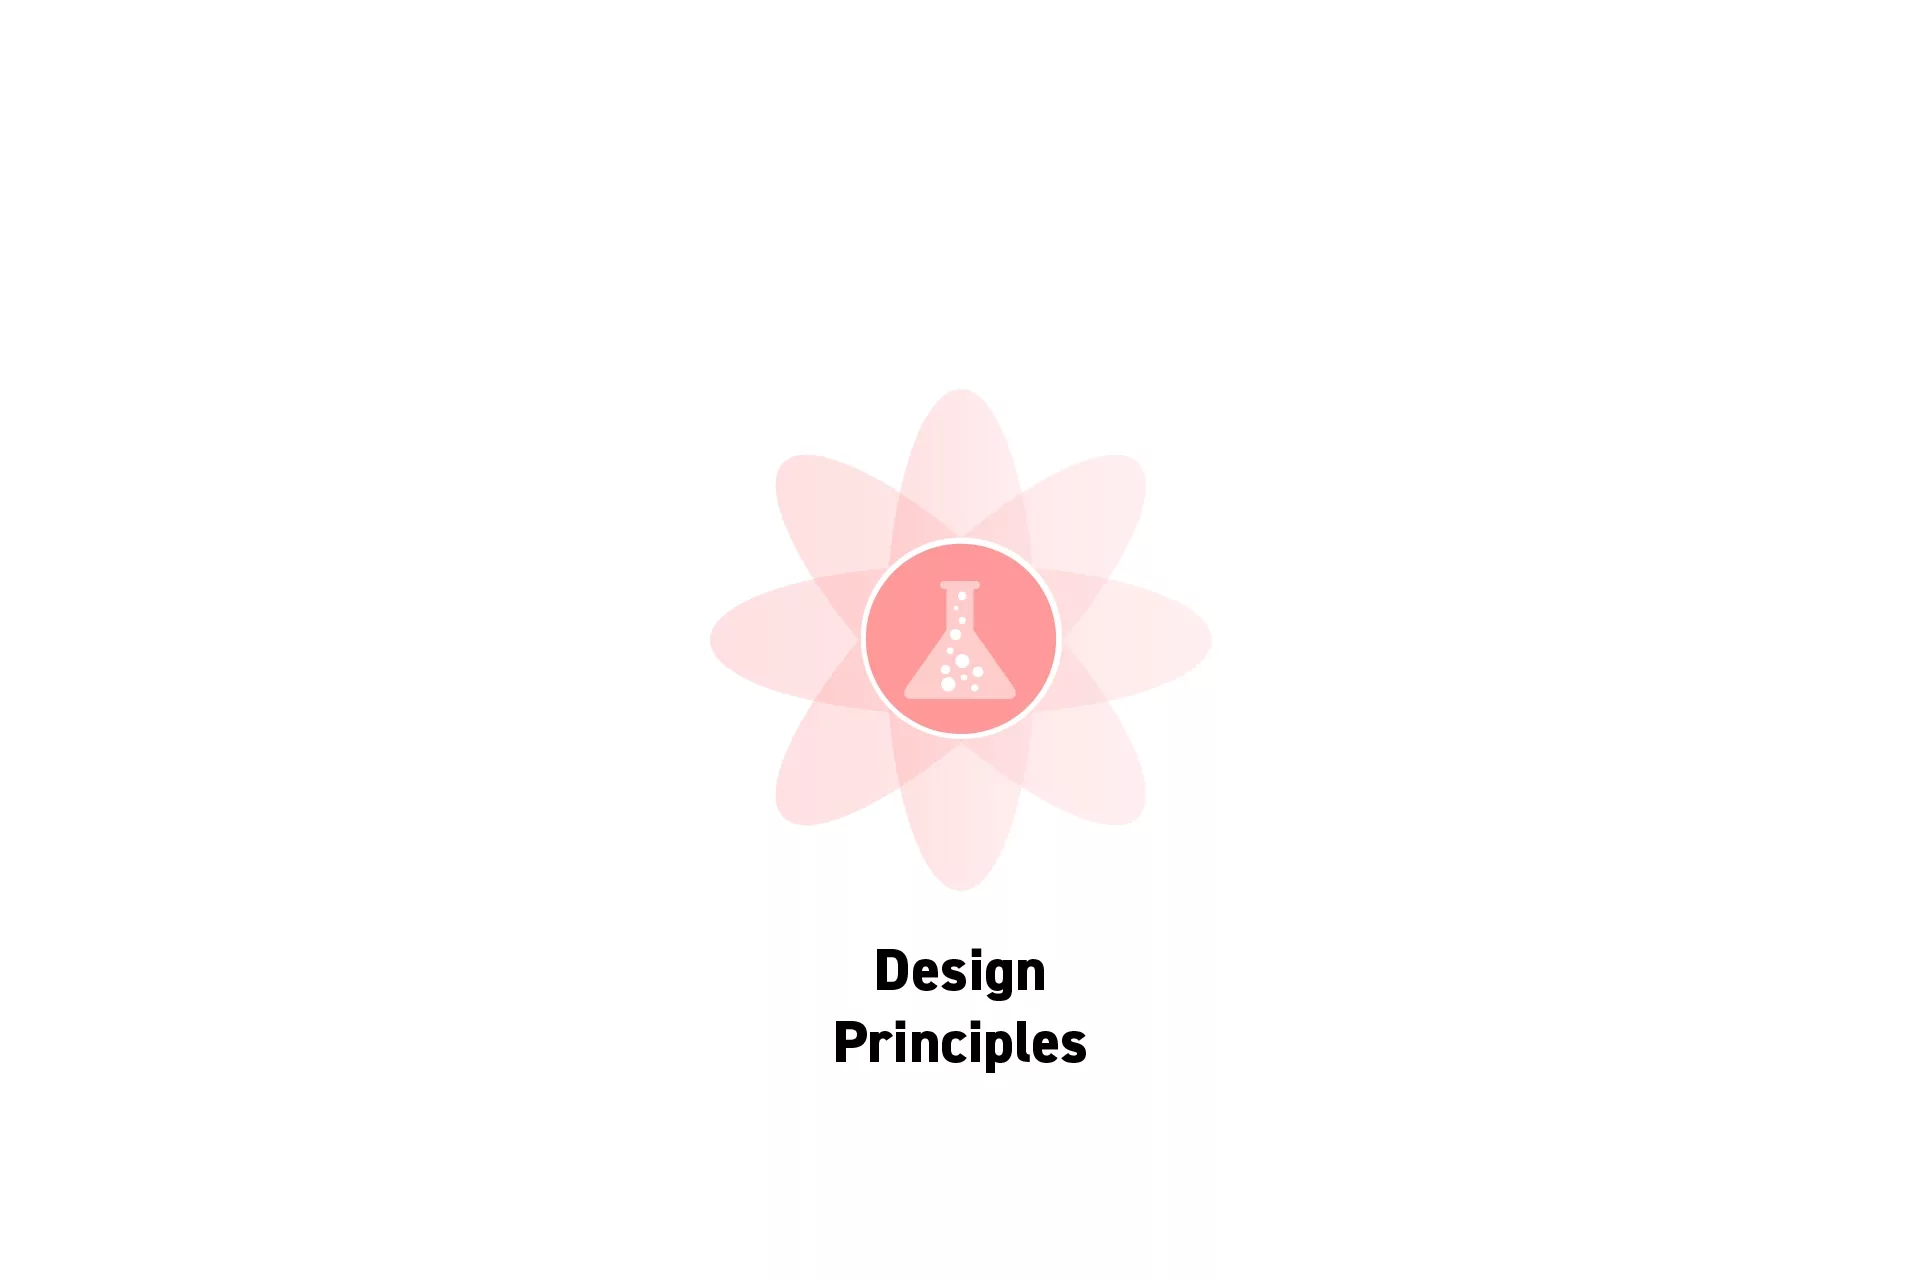 A flower that represents Strategy with the text “Design Principles” beneath it.